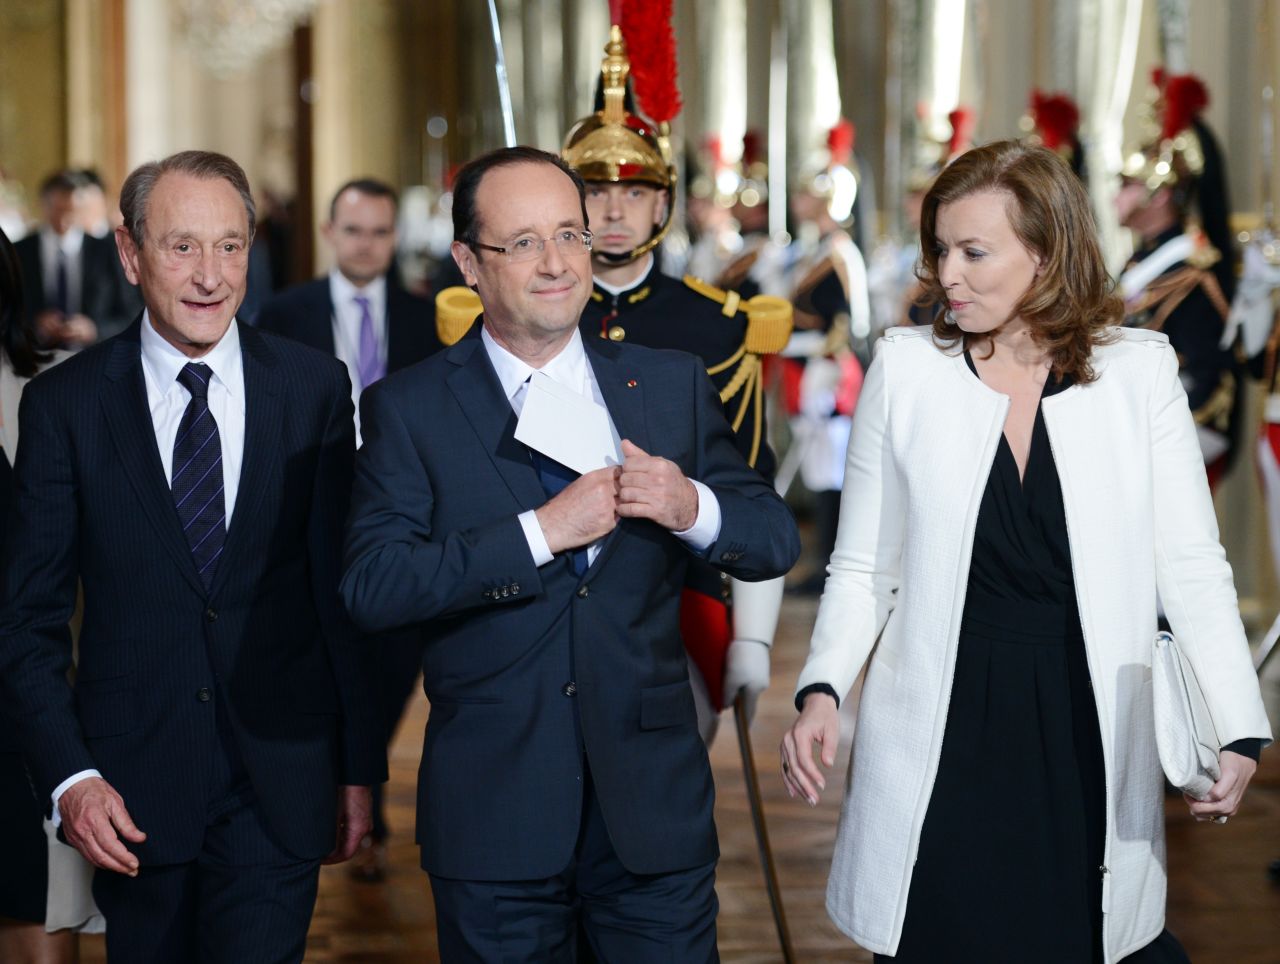 Hollande is flanked by his companion, Valerie Trierweiler, and Paris Mayor Bertrand Delanoe as he arrives to deliver a speech at Paris' town hall.